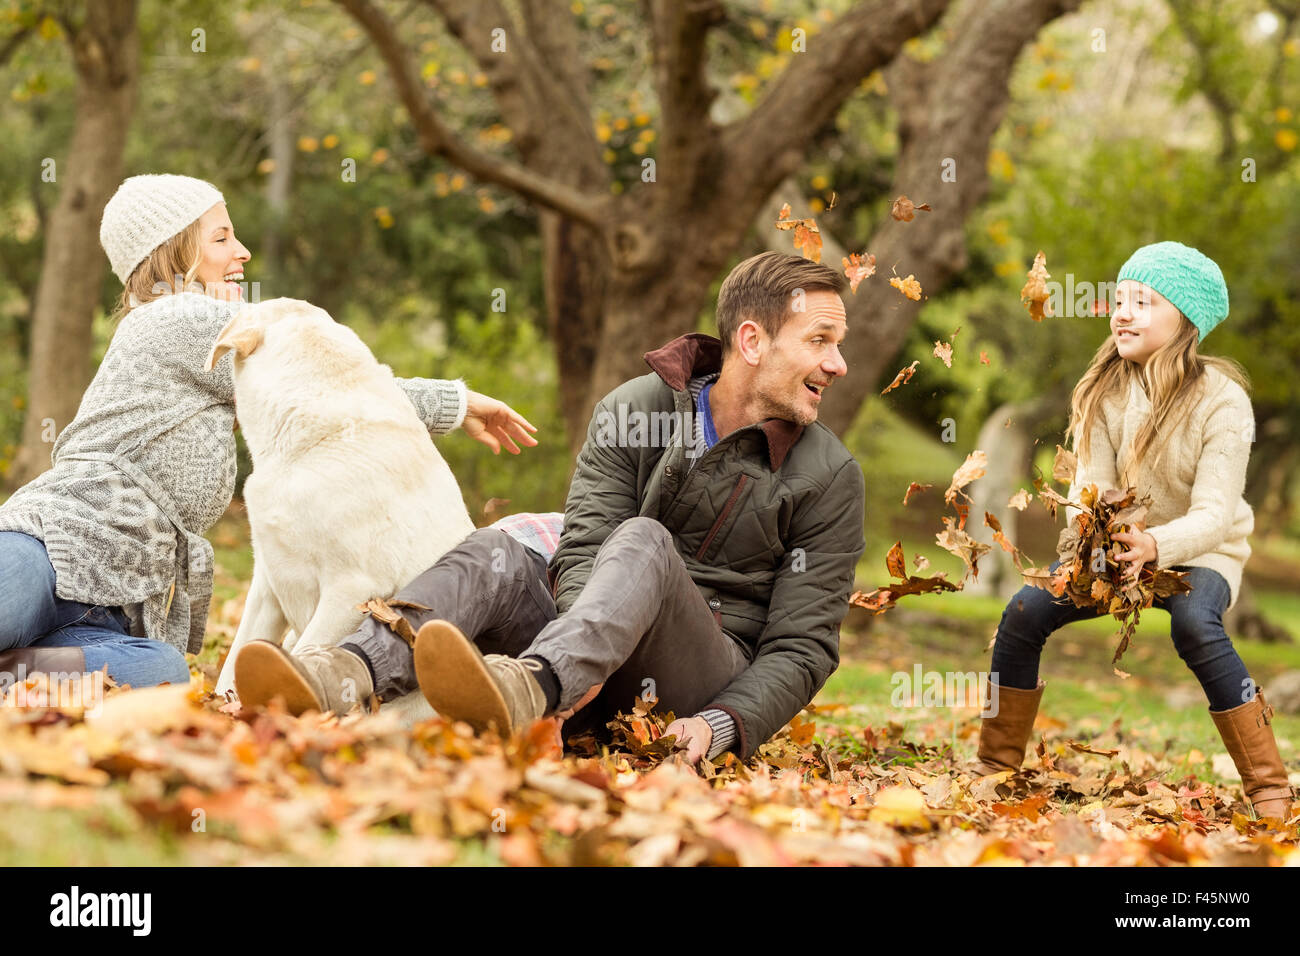 Young family with a dog in leaves Stock Photo